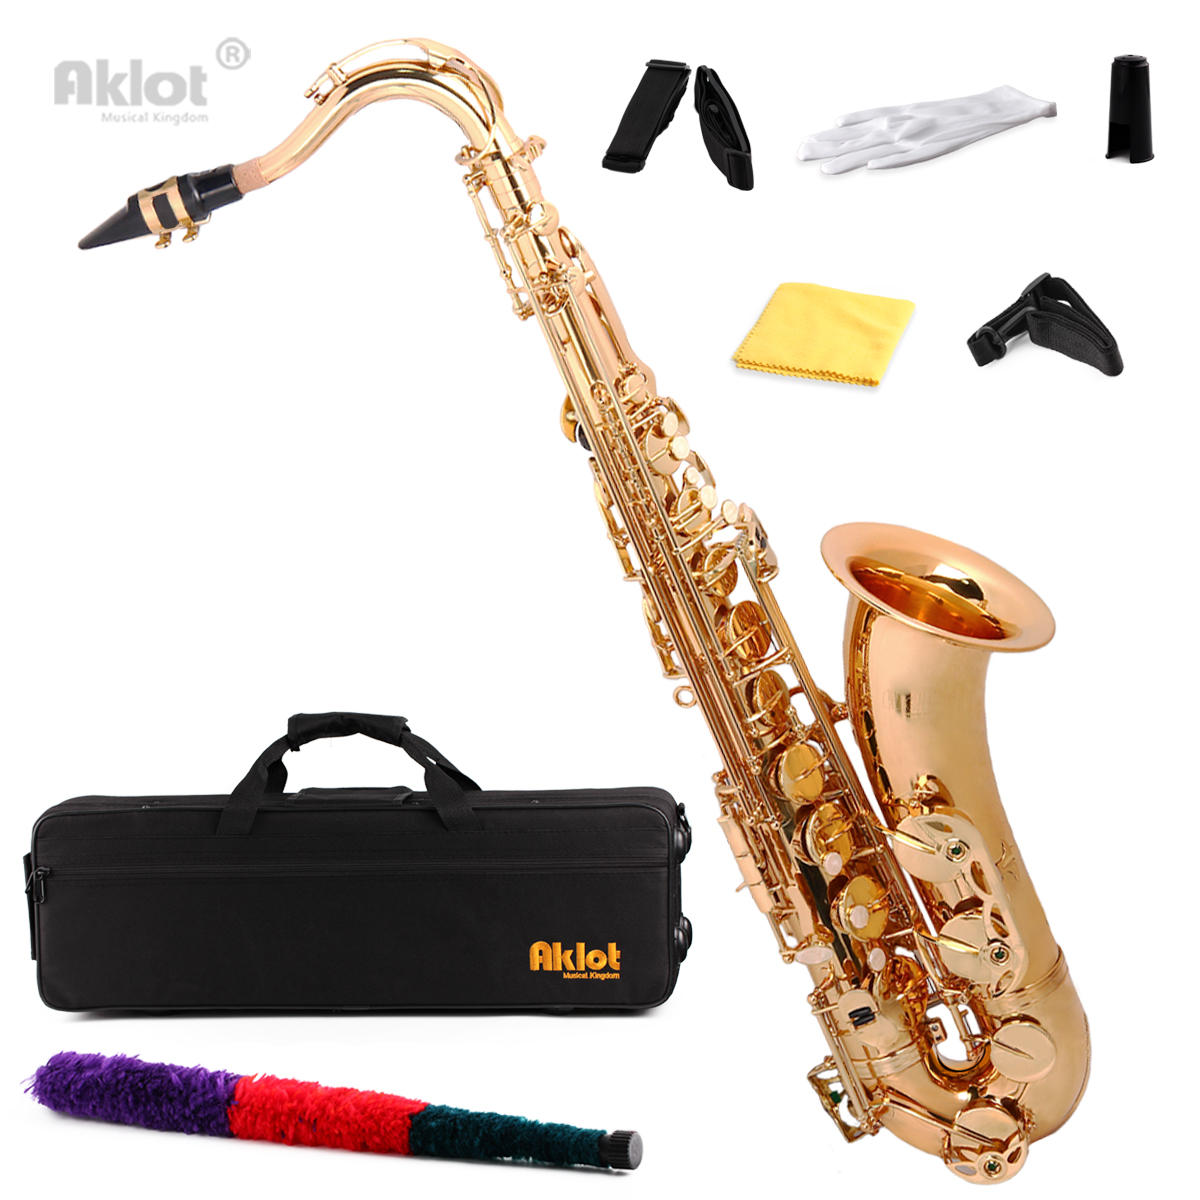 Aklot Bb Gold Beginner Tenor Saxophone Sax Brass Body with Case and Mouthpiece